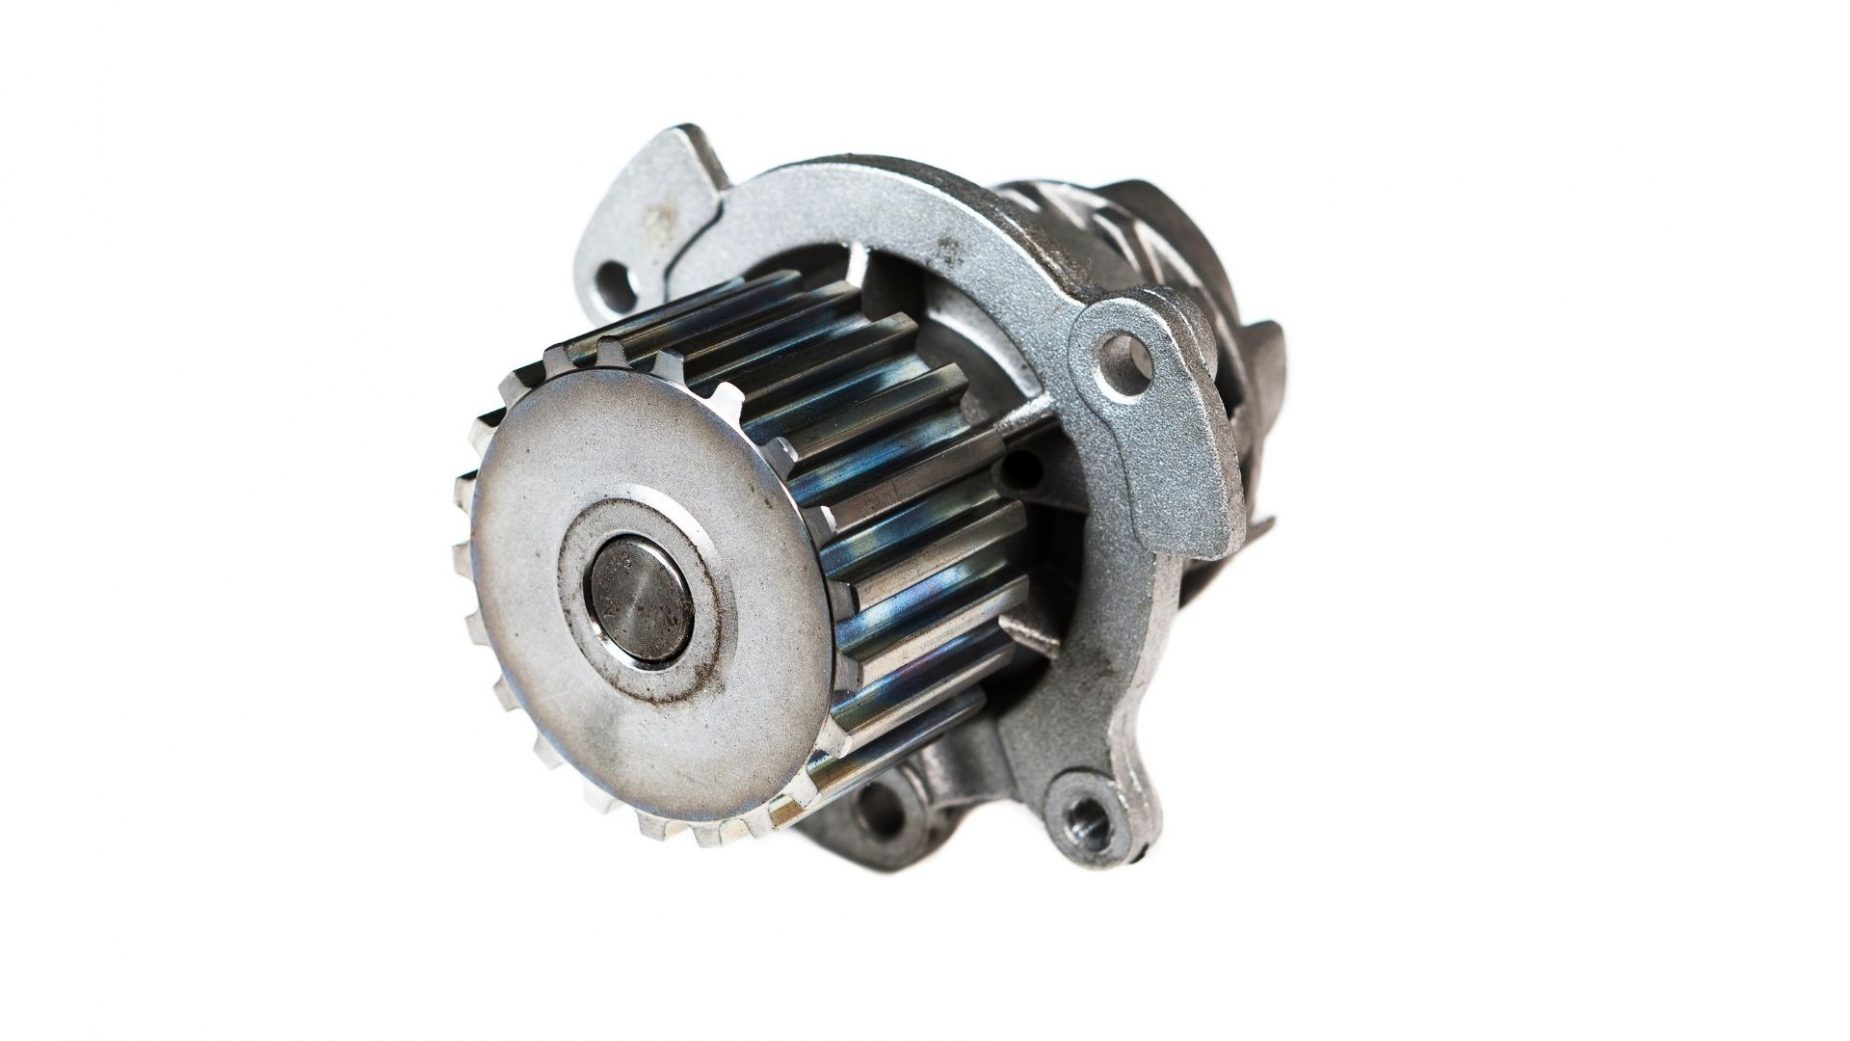 Global Automotive Pumps Market Outlook, Opportunities And Strategies